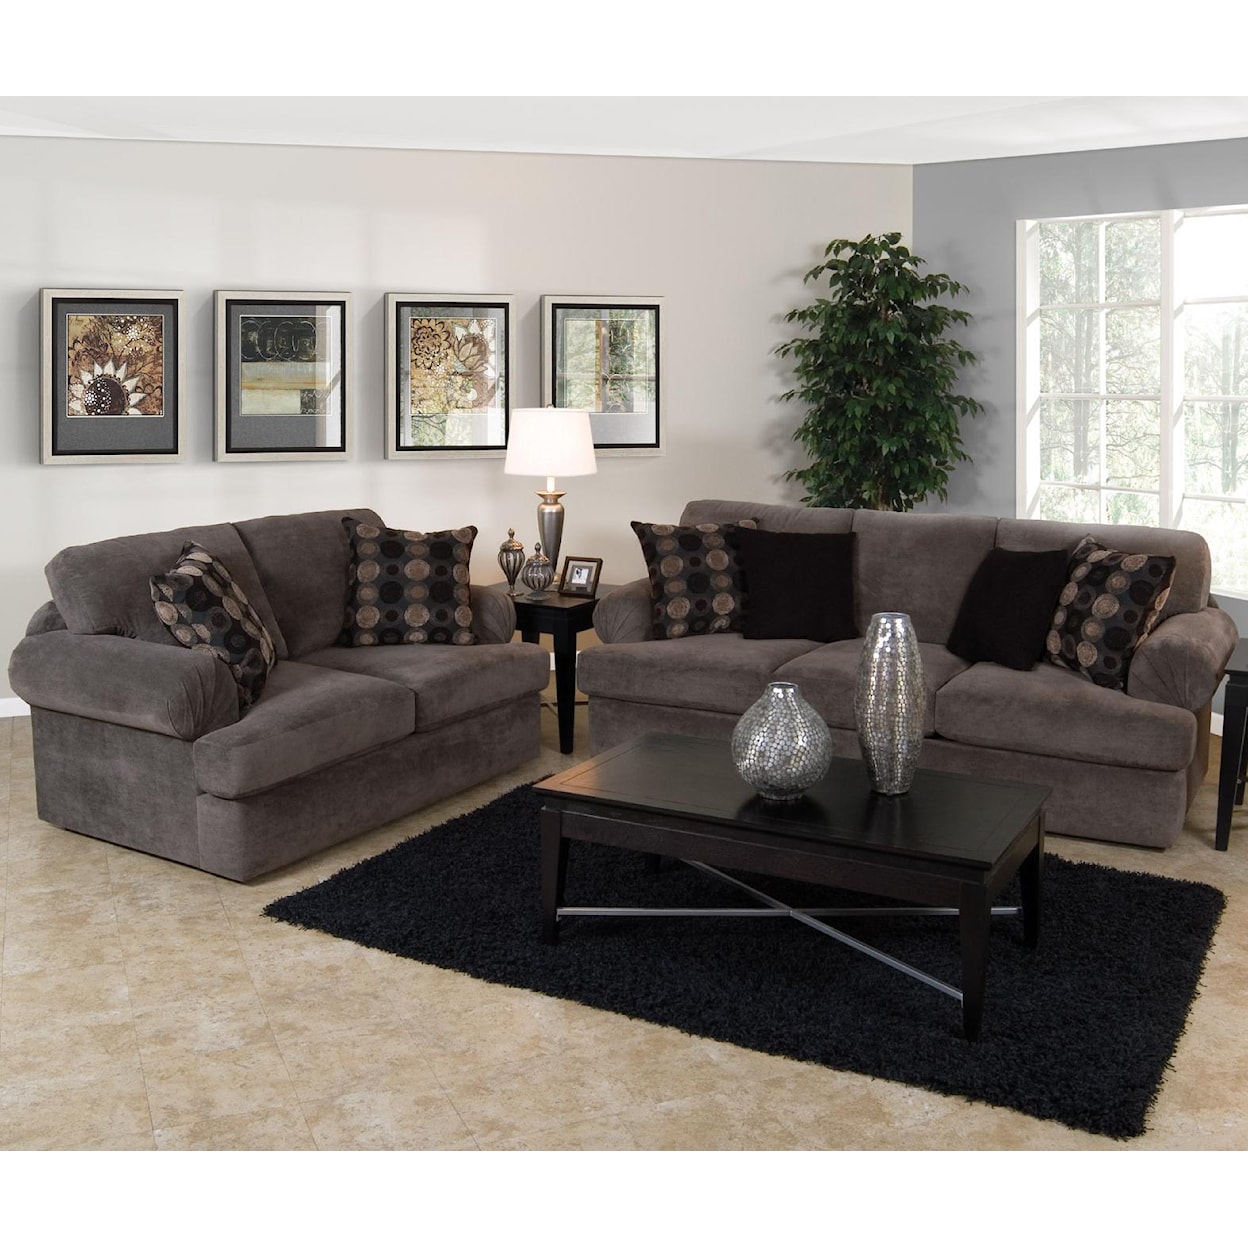 Dimensions 8250 Series Upholstered Loveseat